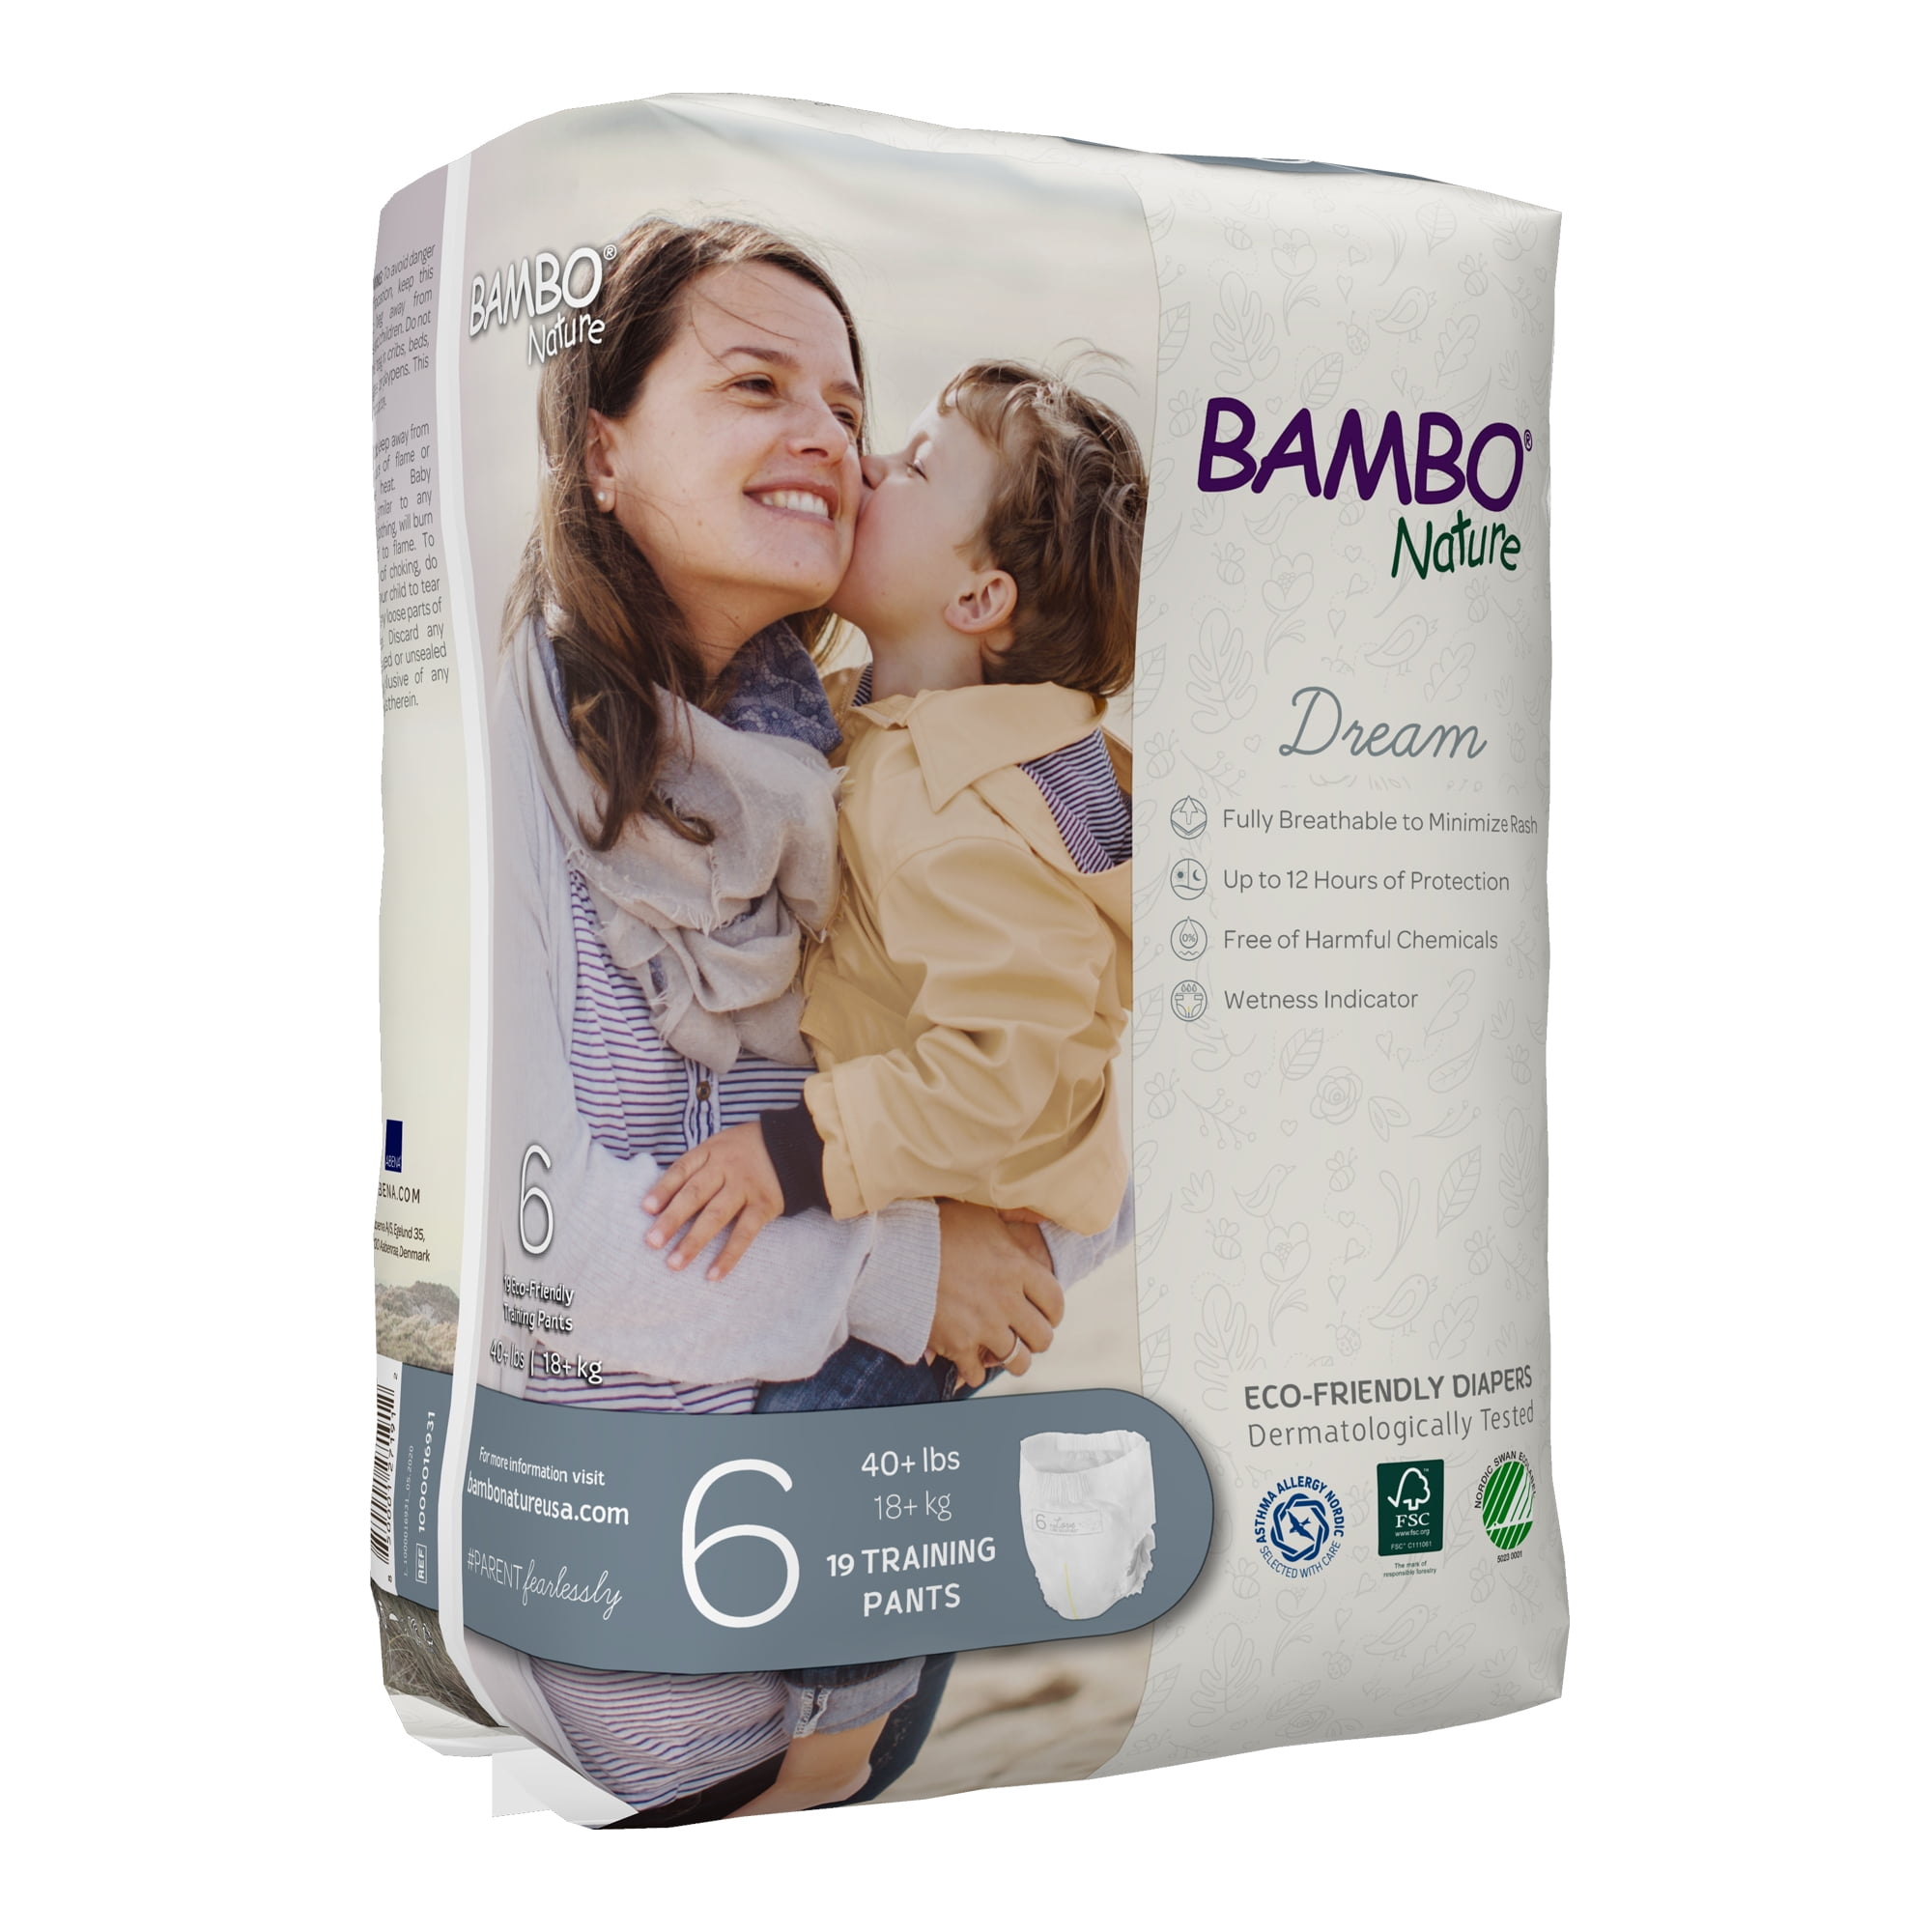 26-44 lbs 200 Count 2 Cases of 100 Off-White Size 5 Bambo Nature Eco Friendly Baby Training Pants Classic for Sensitive Skin 